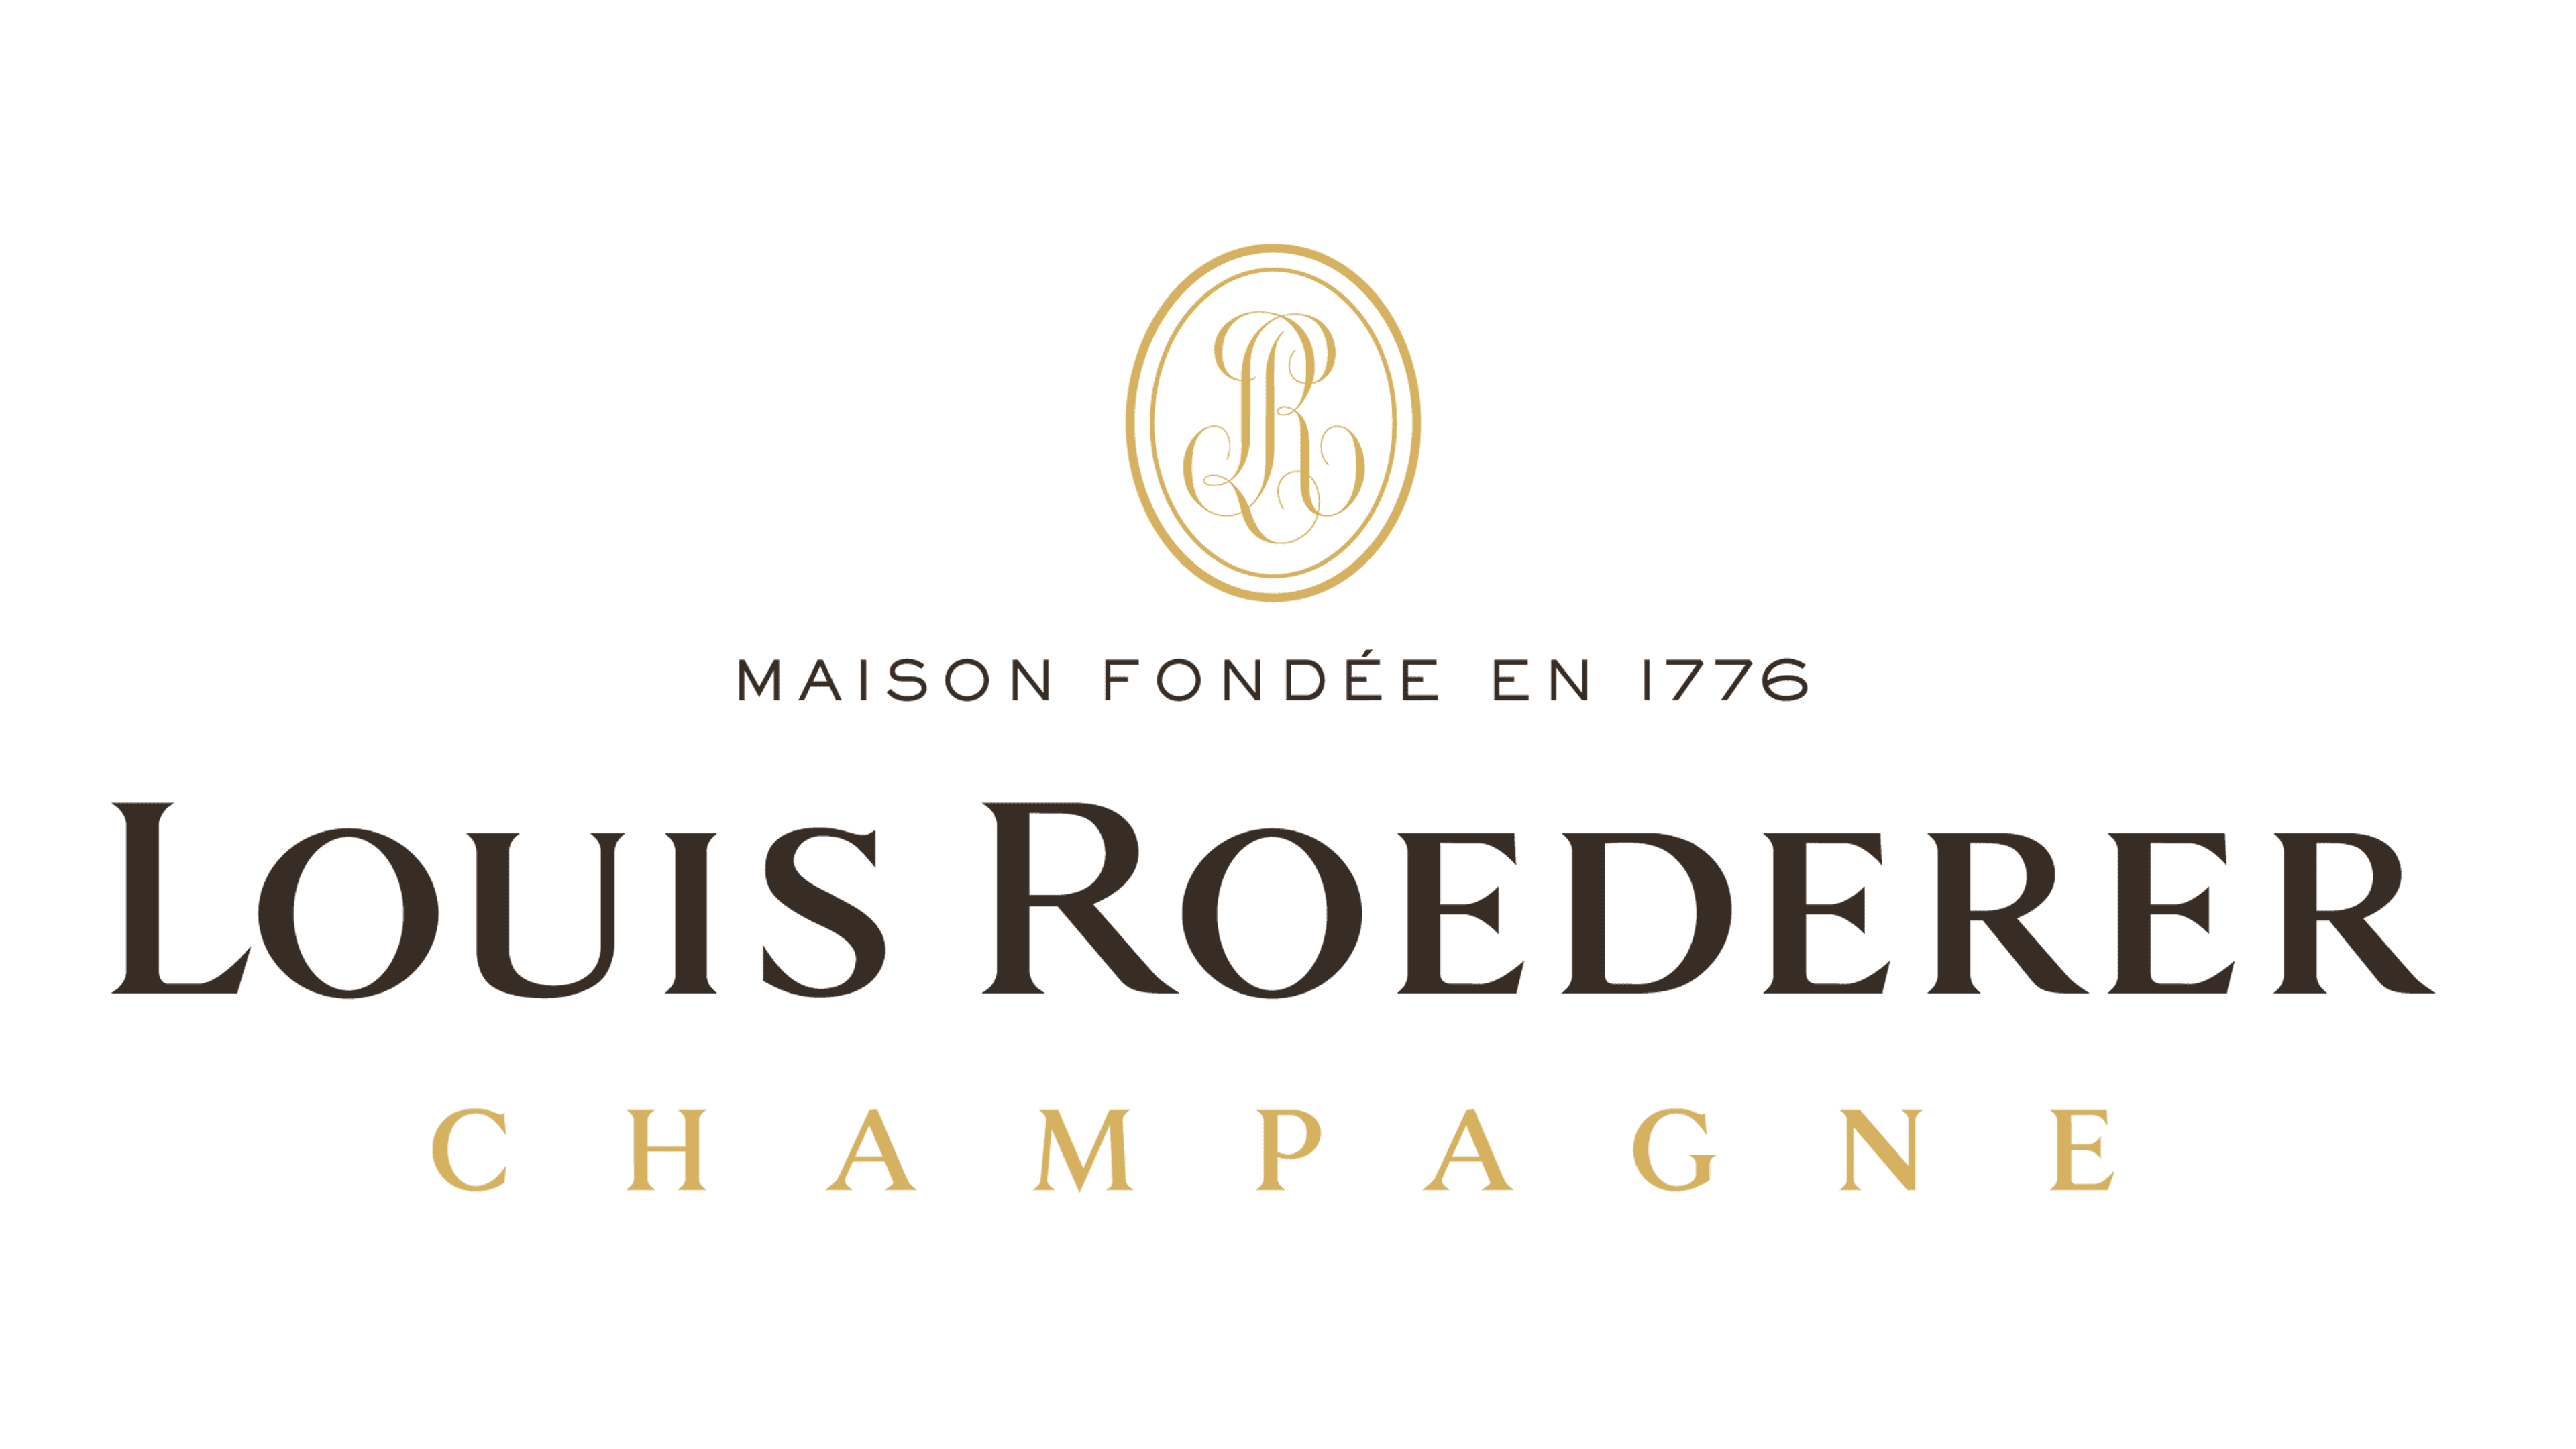 Free Download Fondation Louis Roederer Logo Vector from